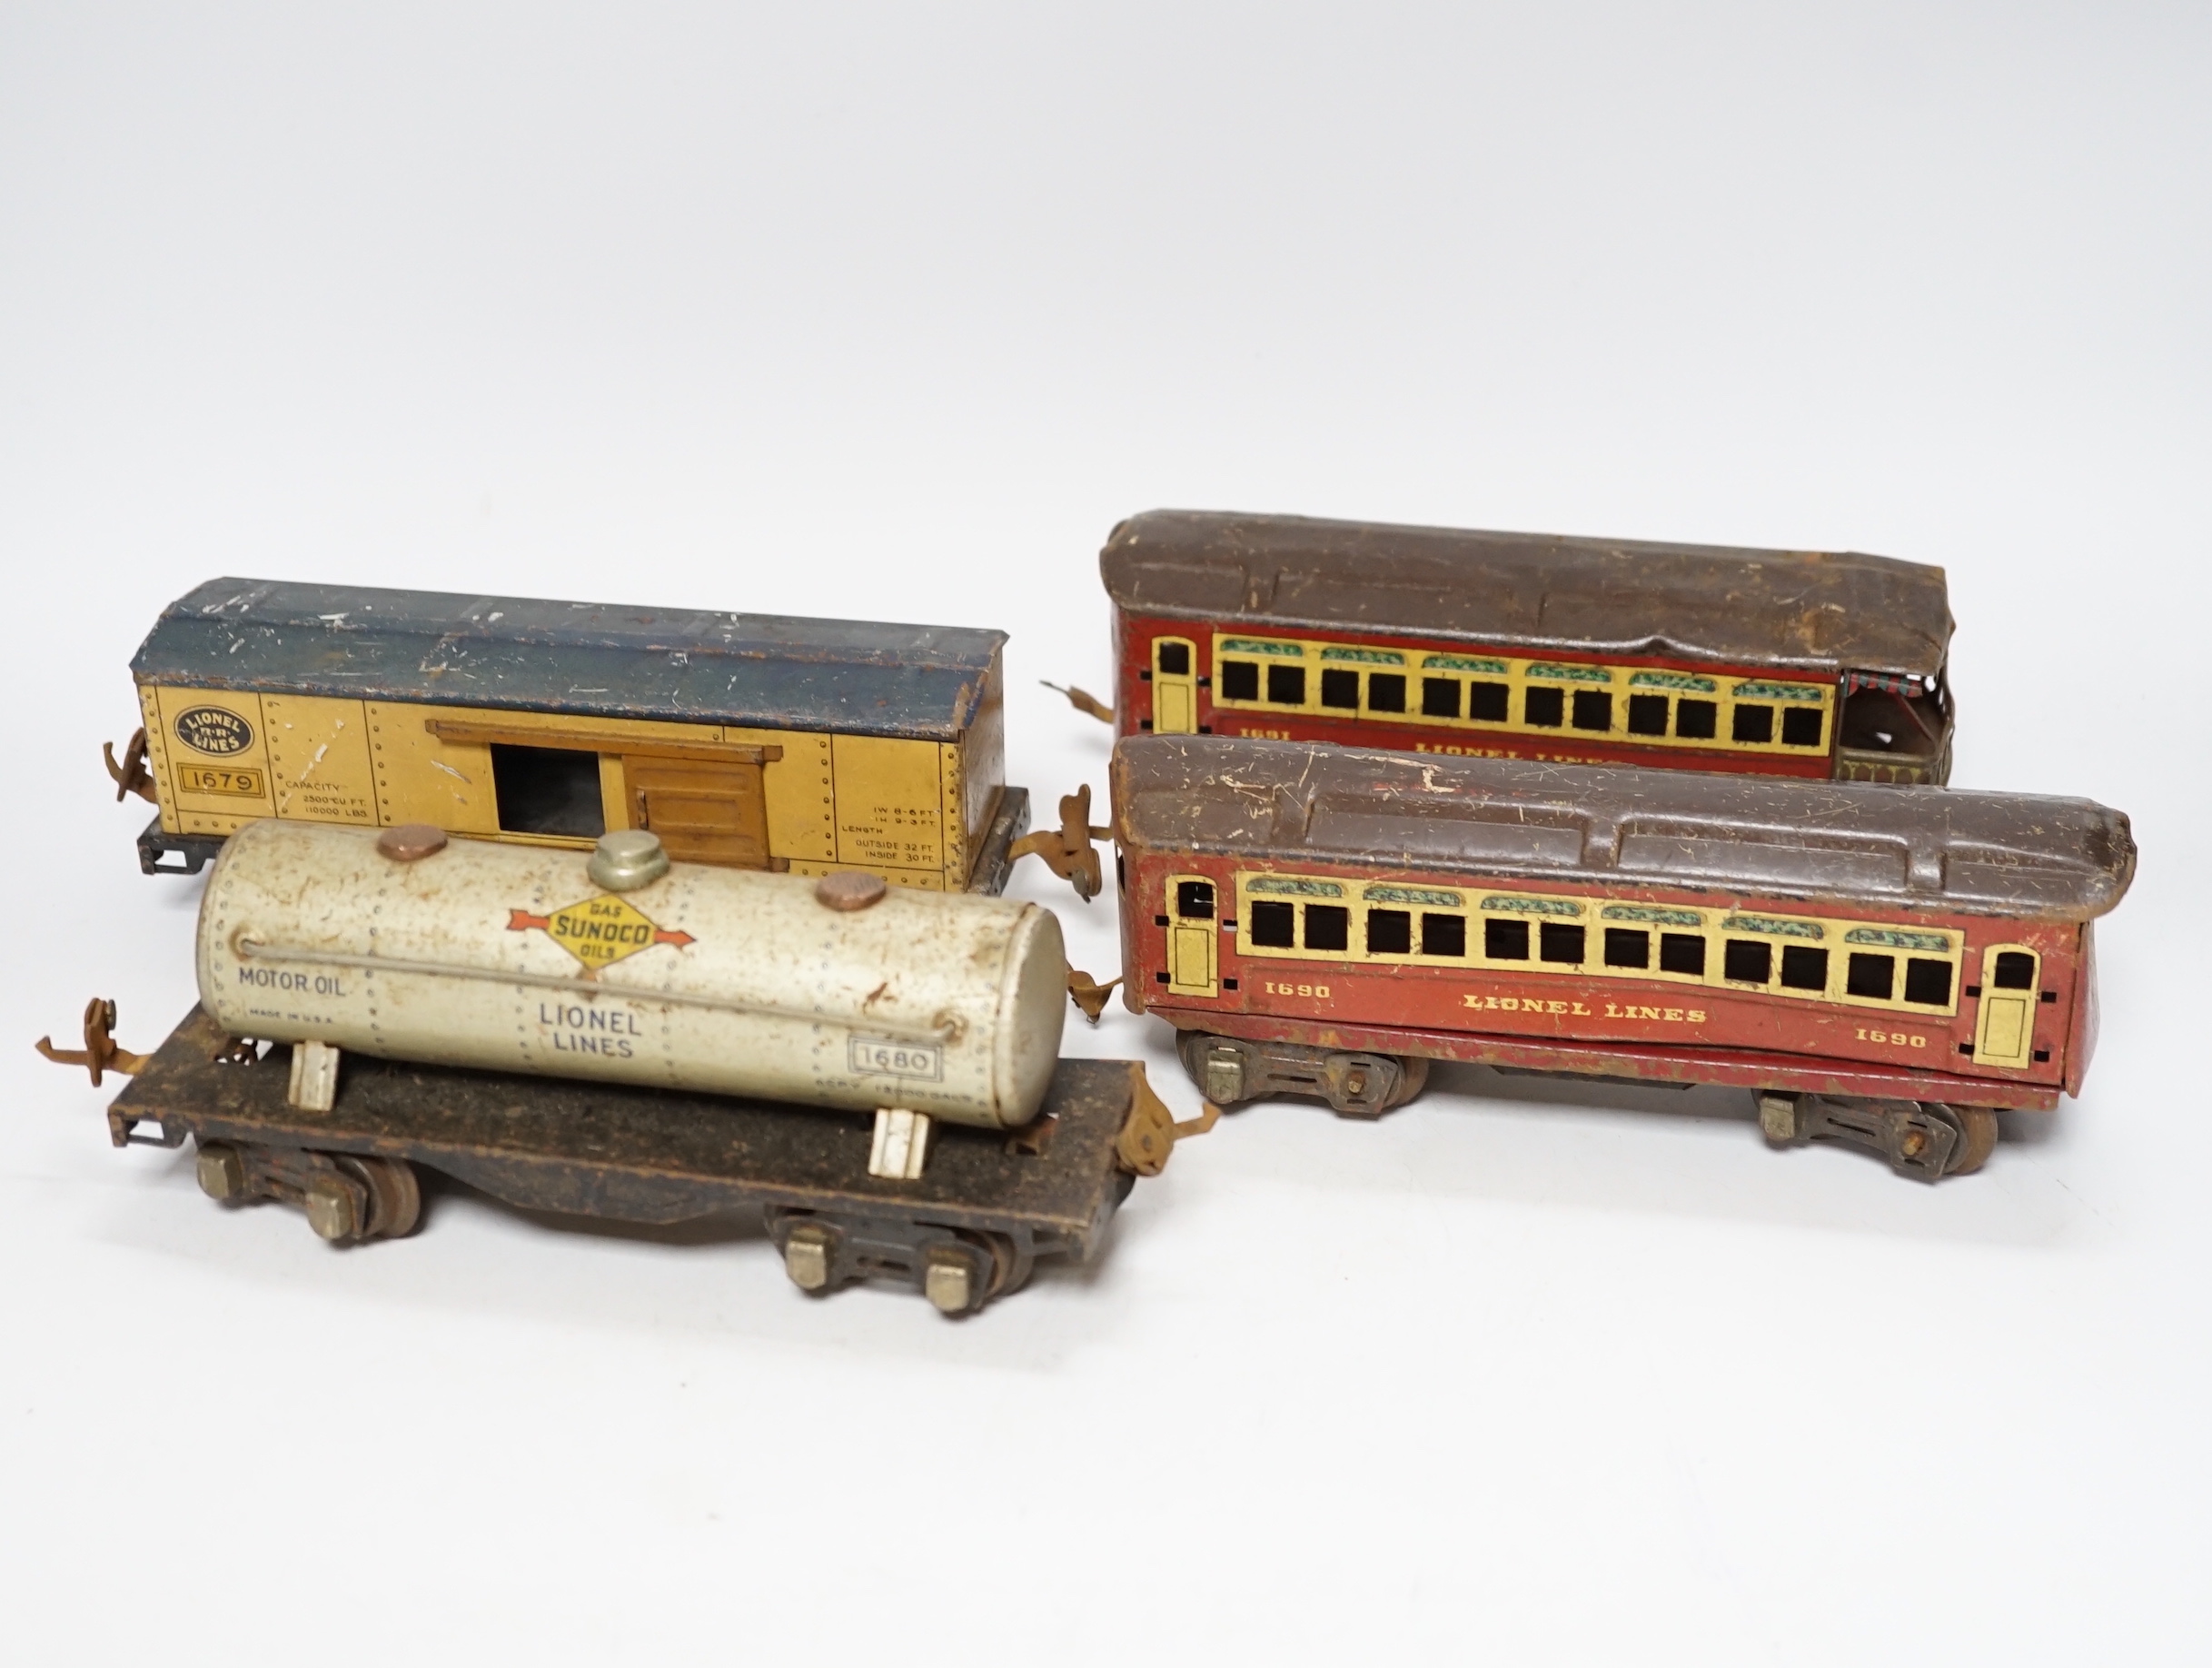 Lionel Lines gauge O tinplate American outline model railway, including seven items of rolling stock together with a quantity of three rail track sections